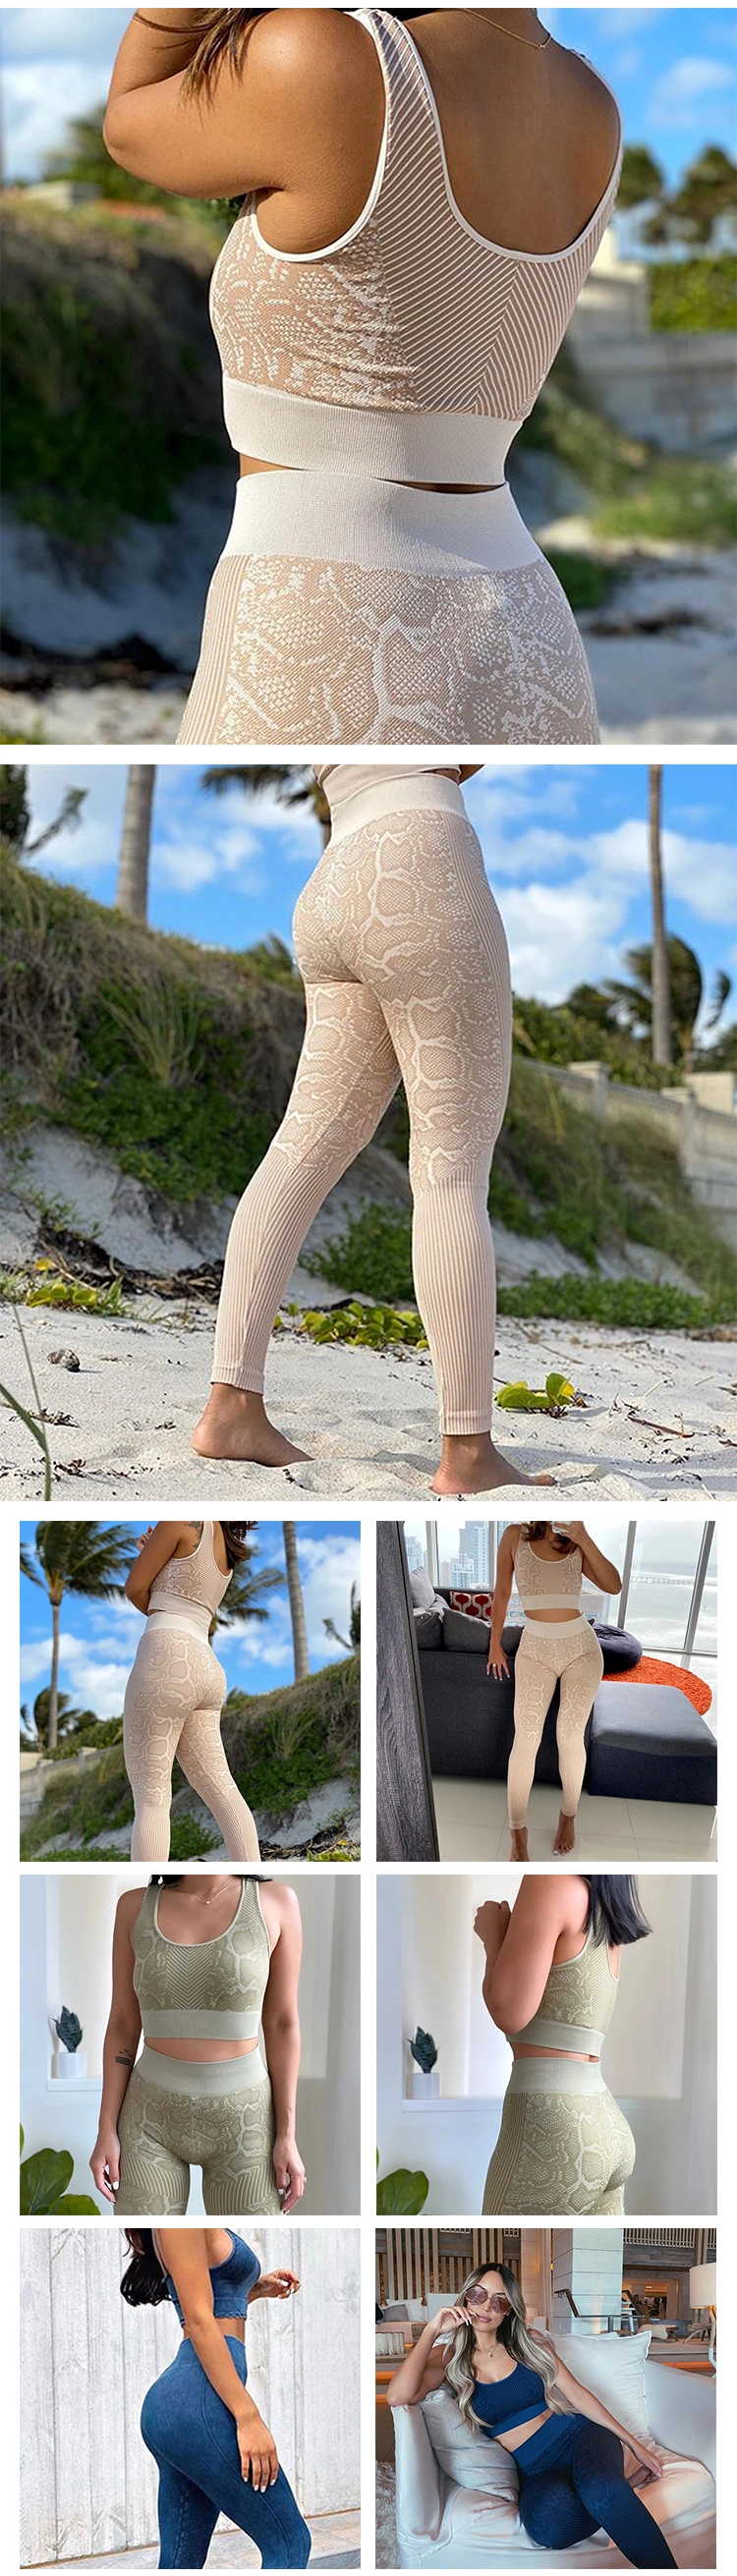 Women's Snakeskin Crop Cami Top and Legging Shorts Set 2 Pieces Yoga Printed Outfit Clothes Sports Wear for Fitness Gym Workout